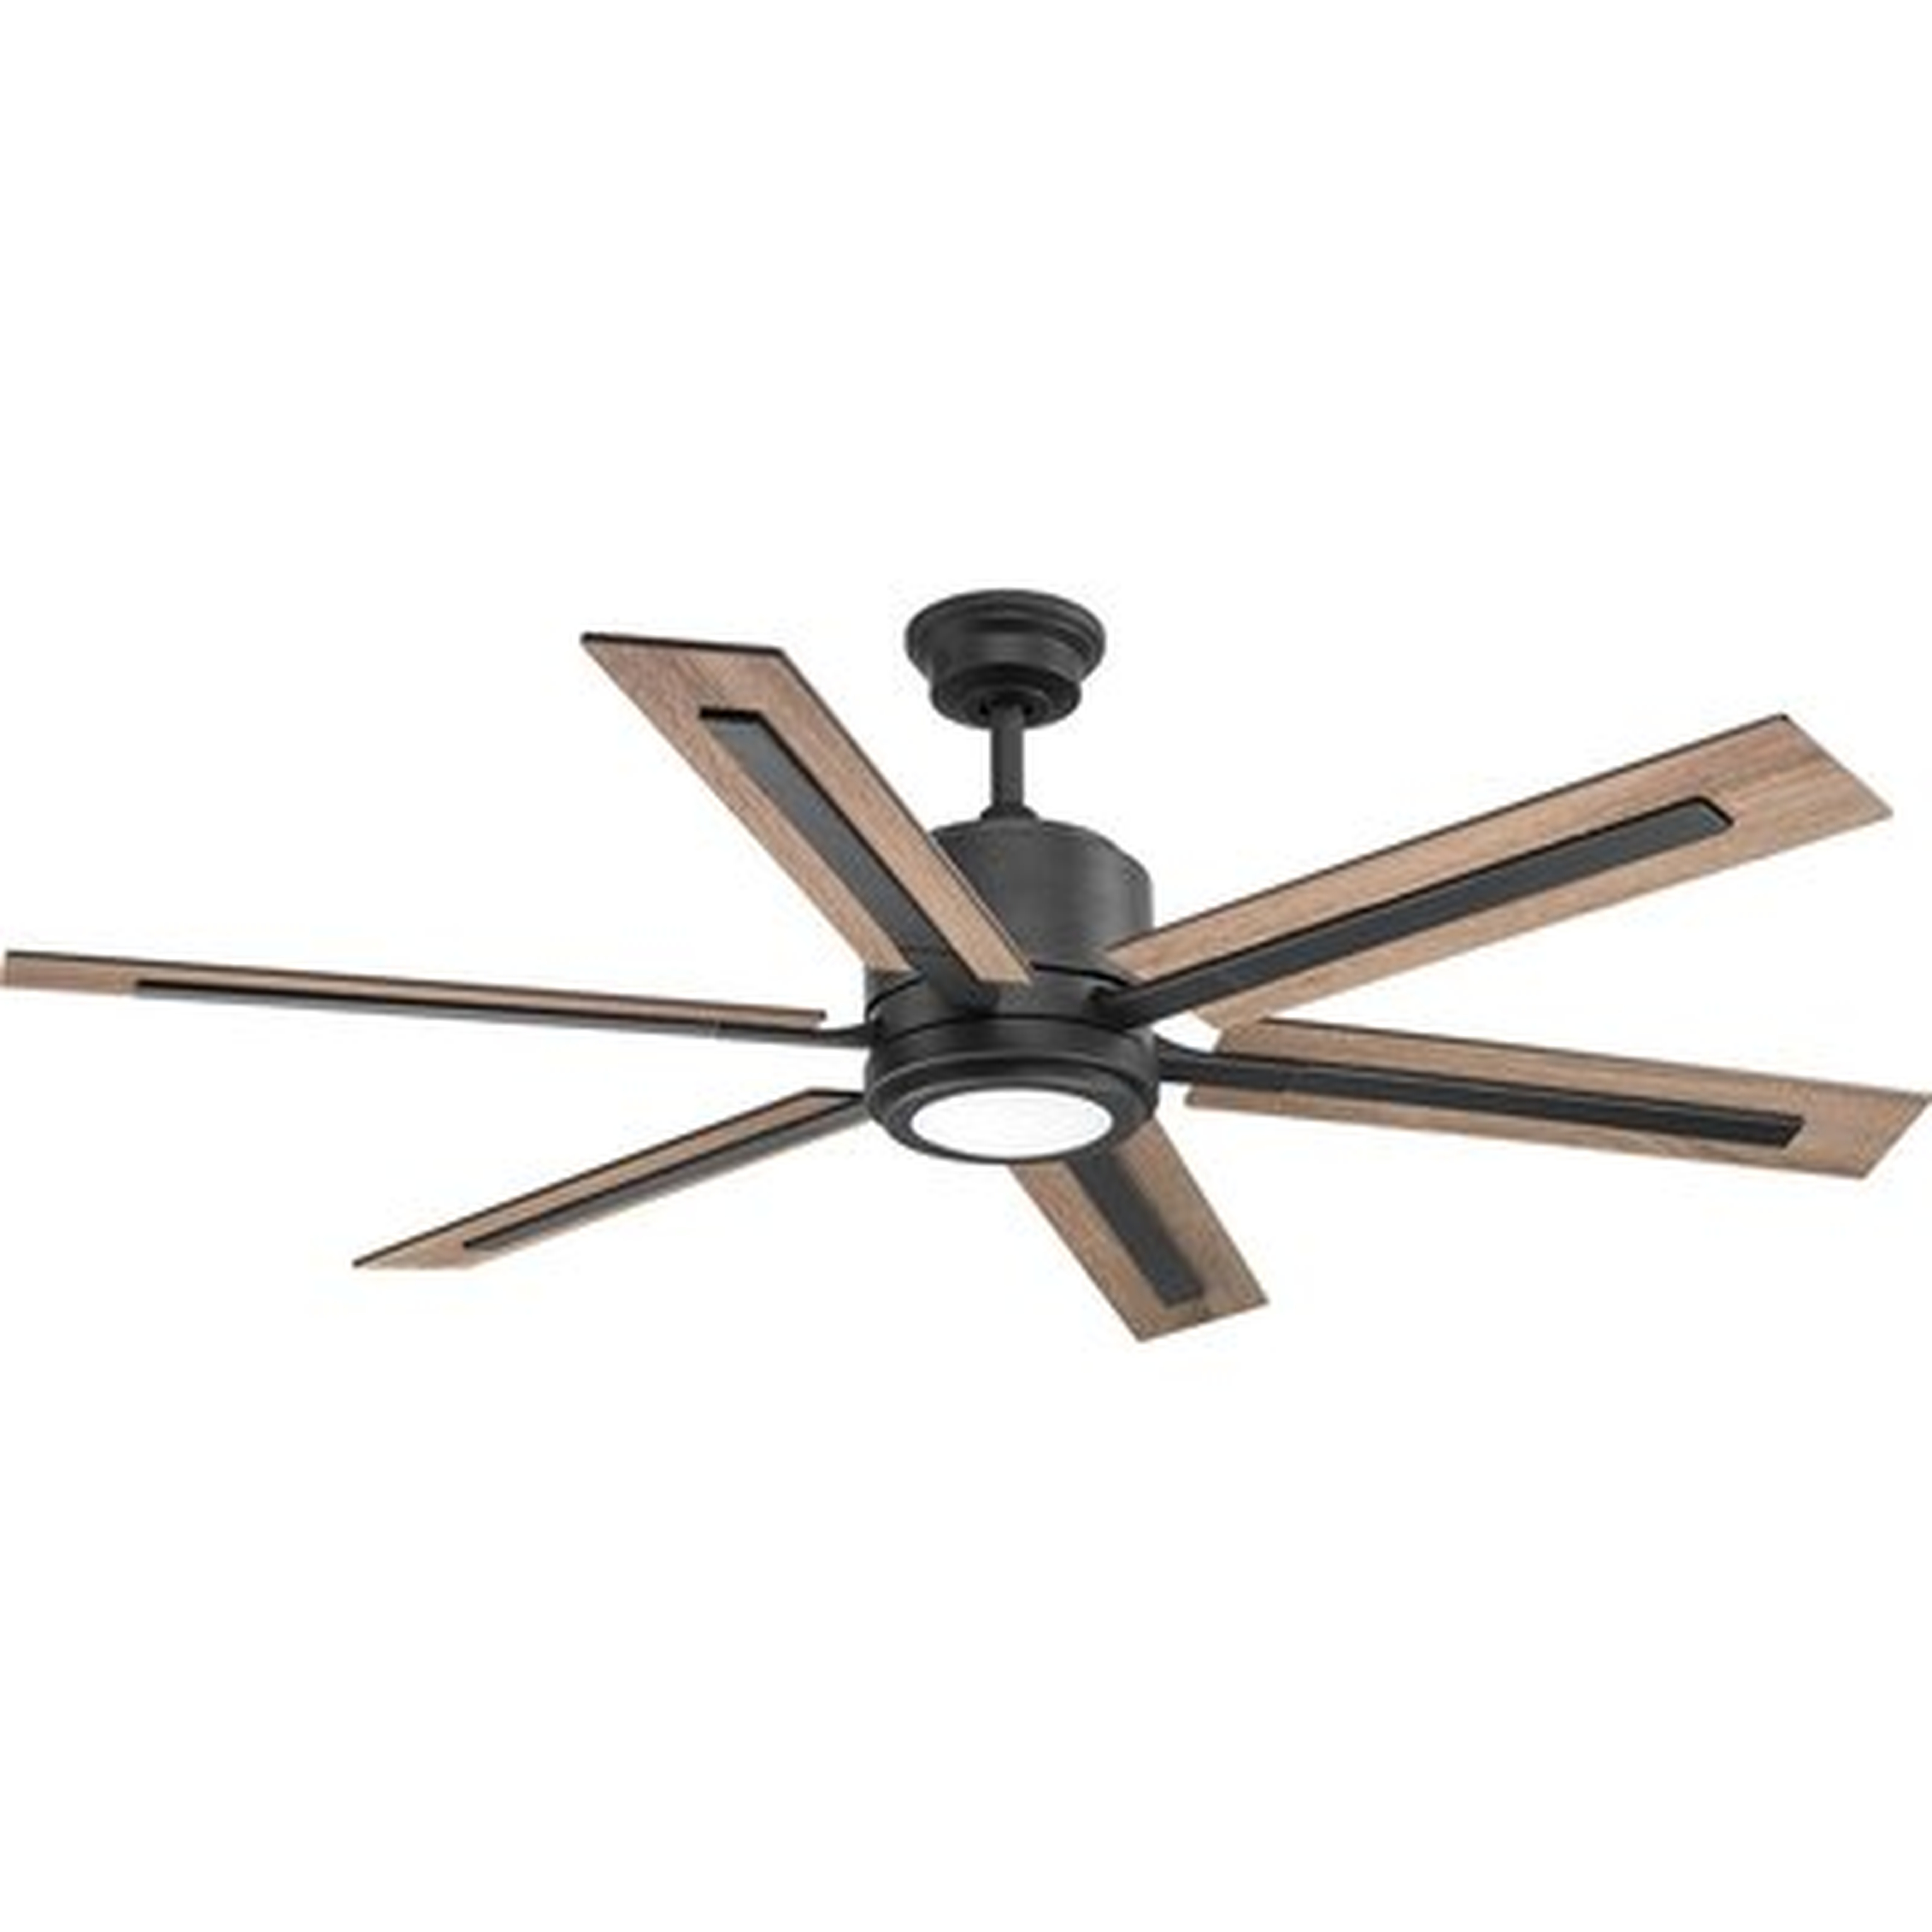 60" Lesure 6 Blade LED Ceiling Fan with Remote, Light Kit Included - Birch Lane